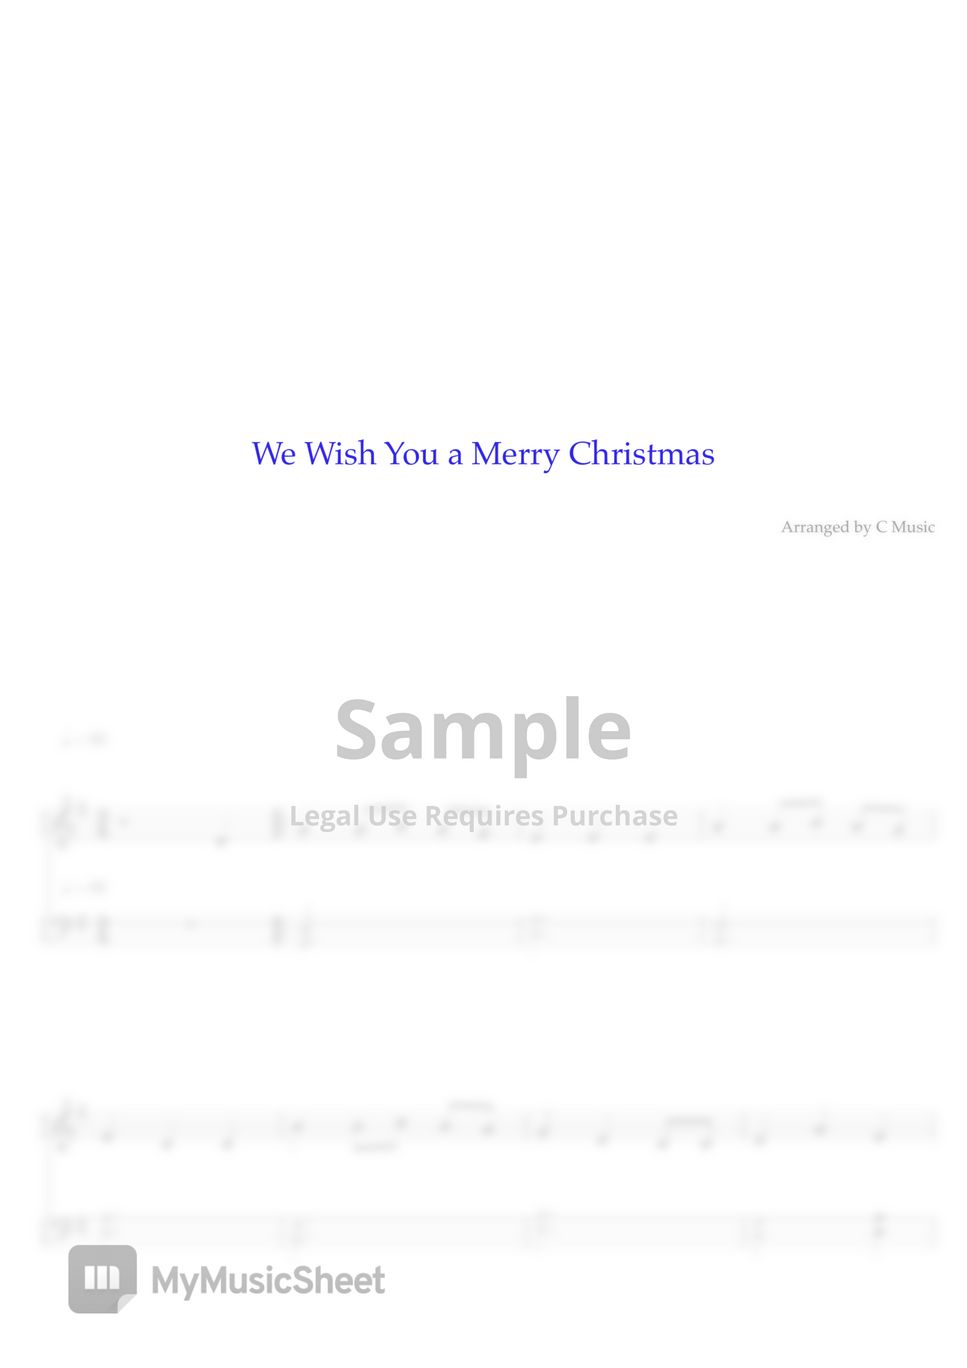 English Folk Song - We Wish You a Merry Christmas (Easy Version) by C Music